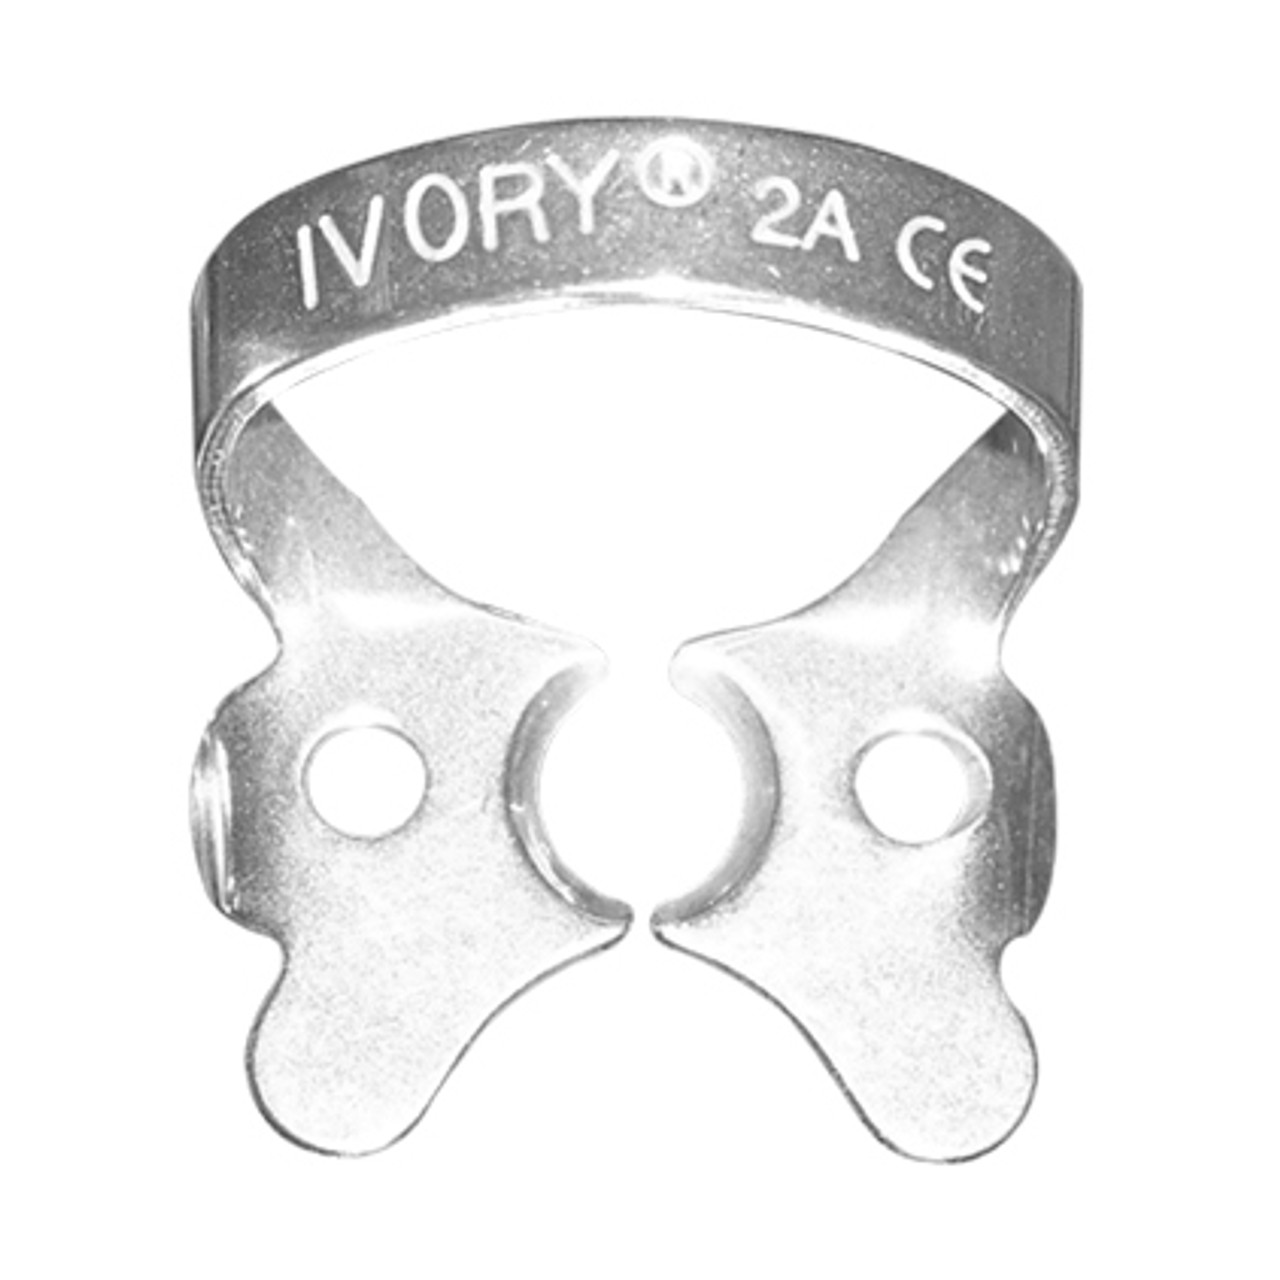 Ivory Rubber Dam Clamps, Wingless W56, Large Molar